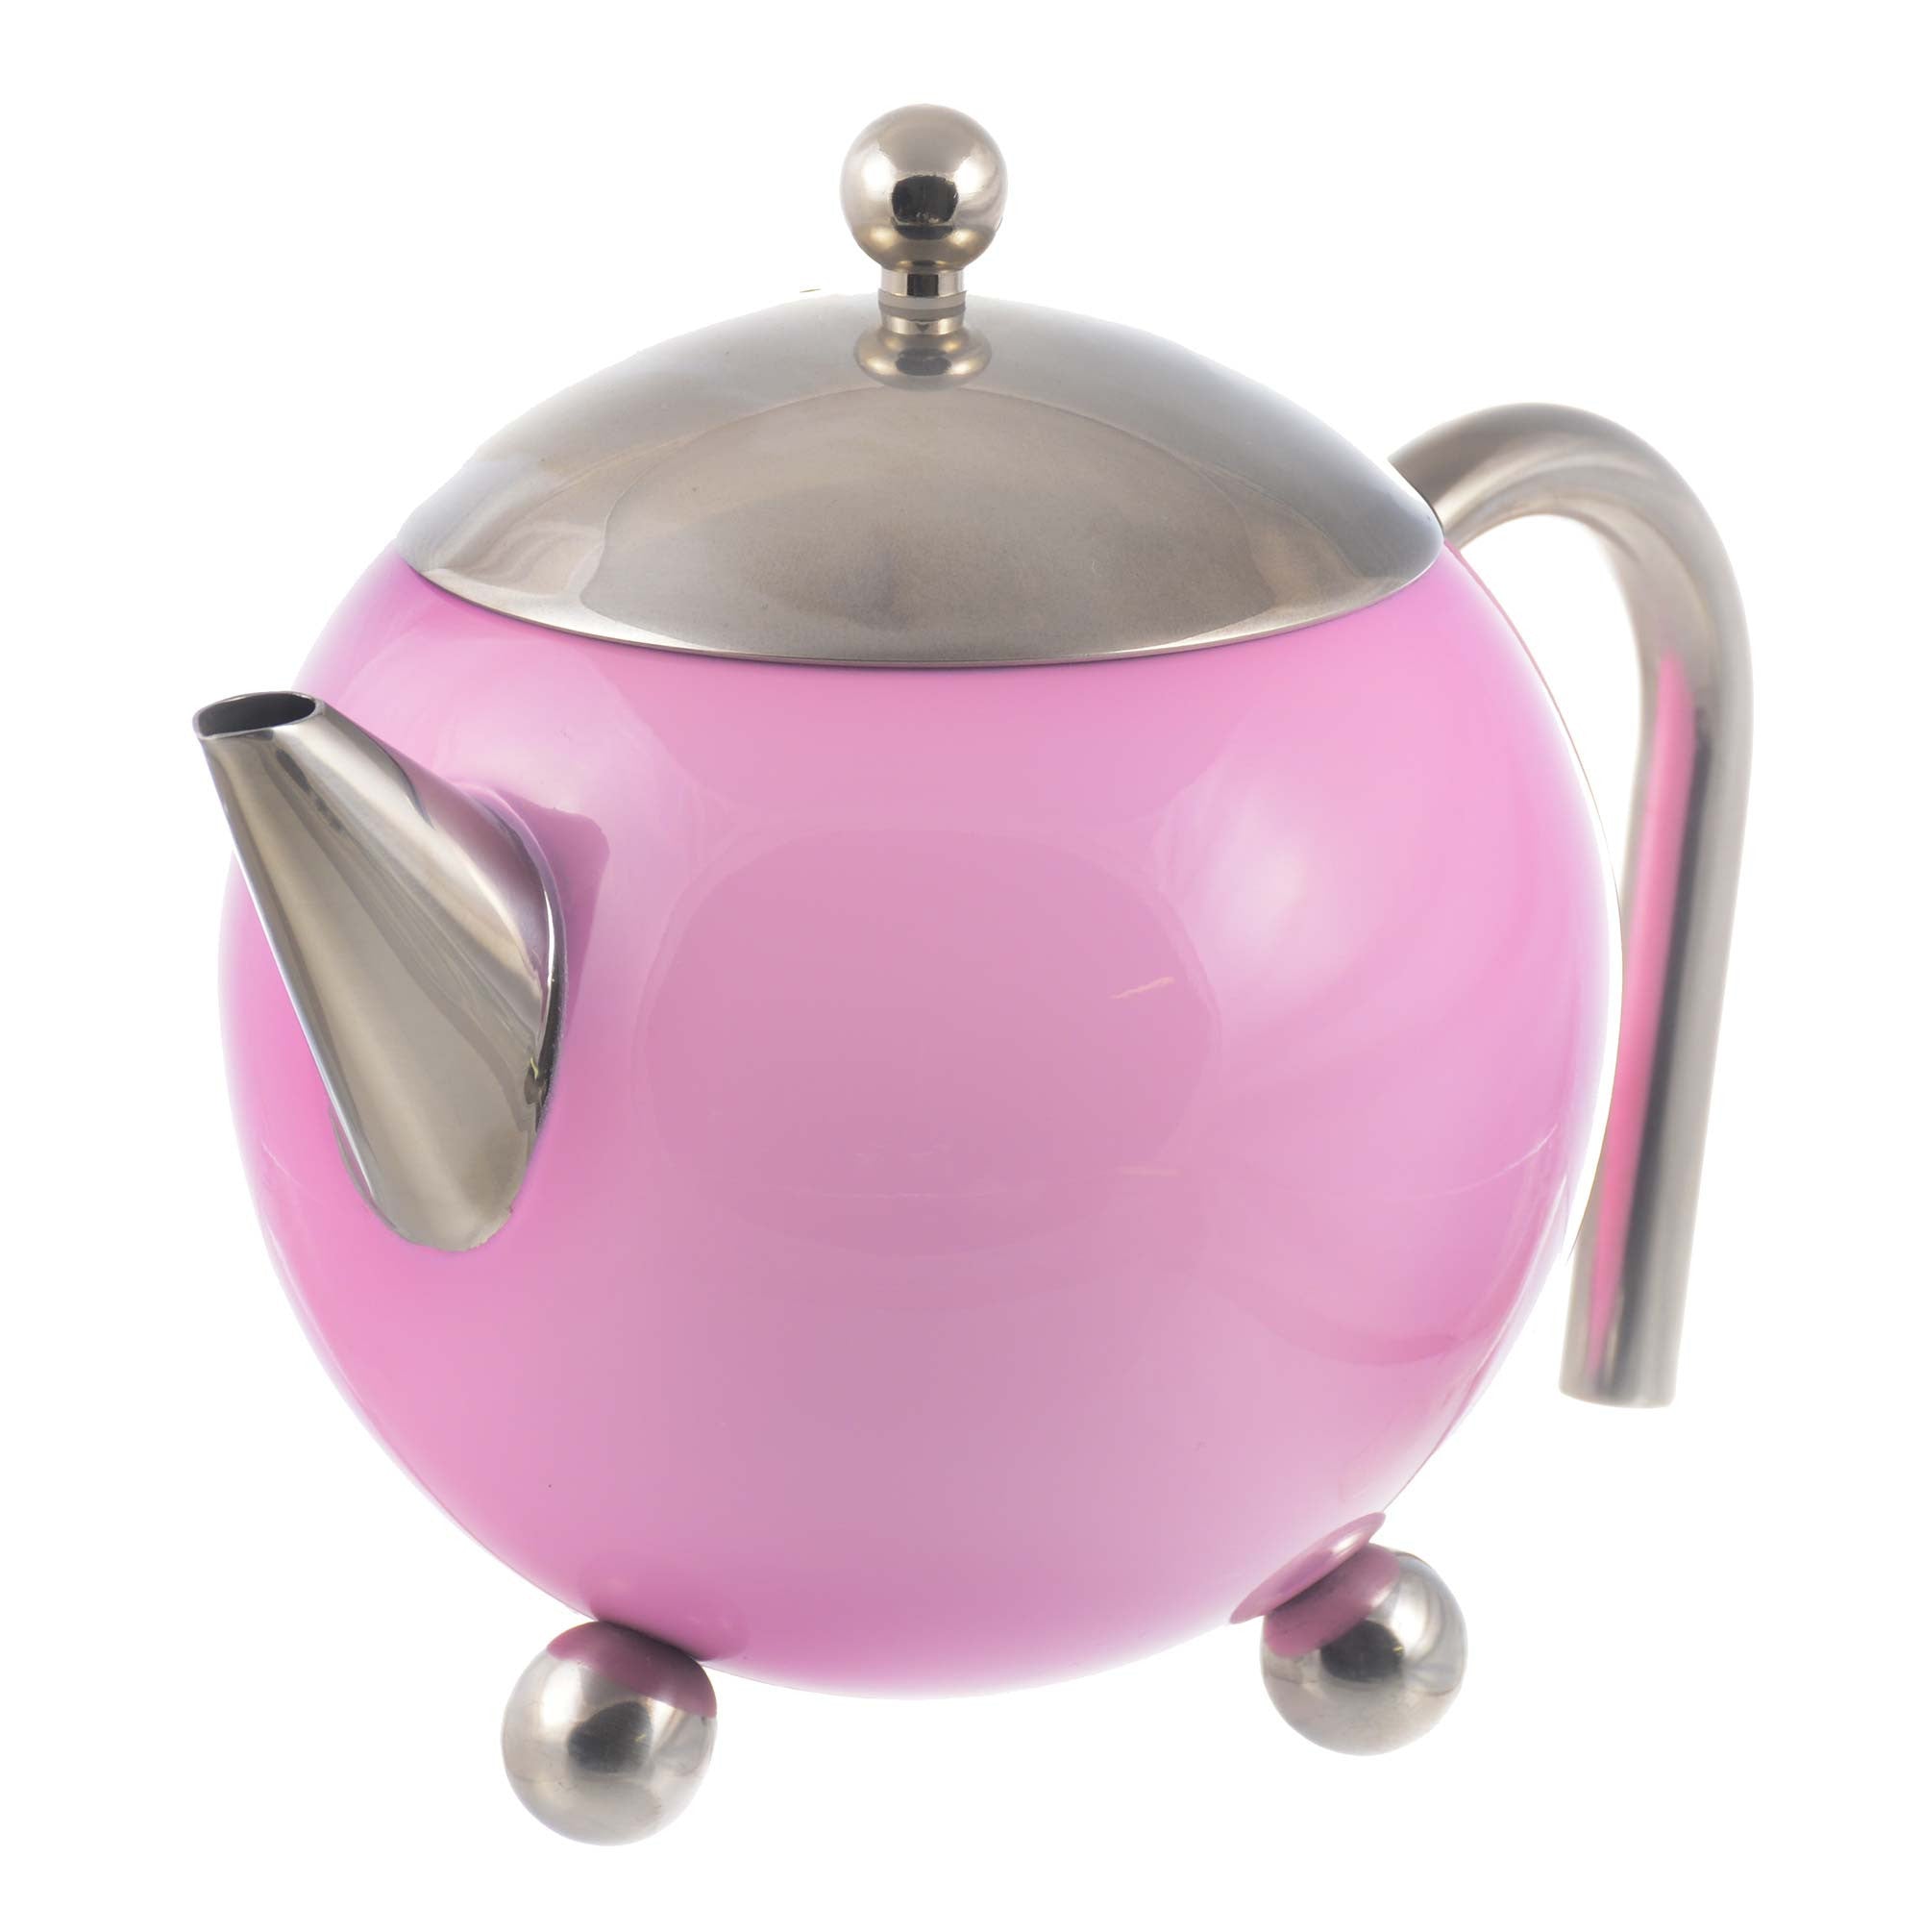 Farmhouse Small Teapot with Infuser, Ceramic, Pink, 2 Cup (600 ml)